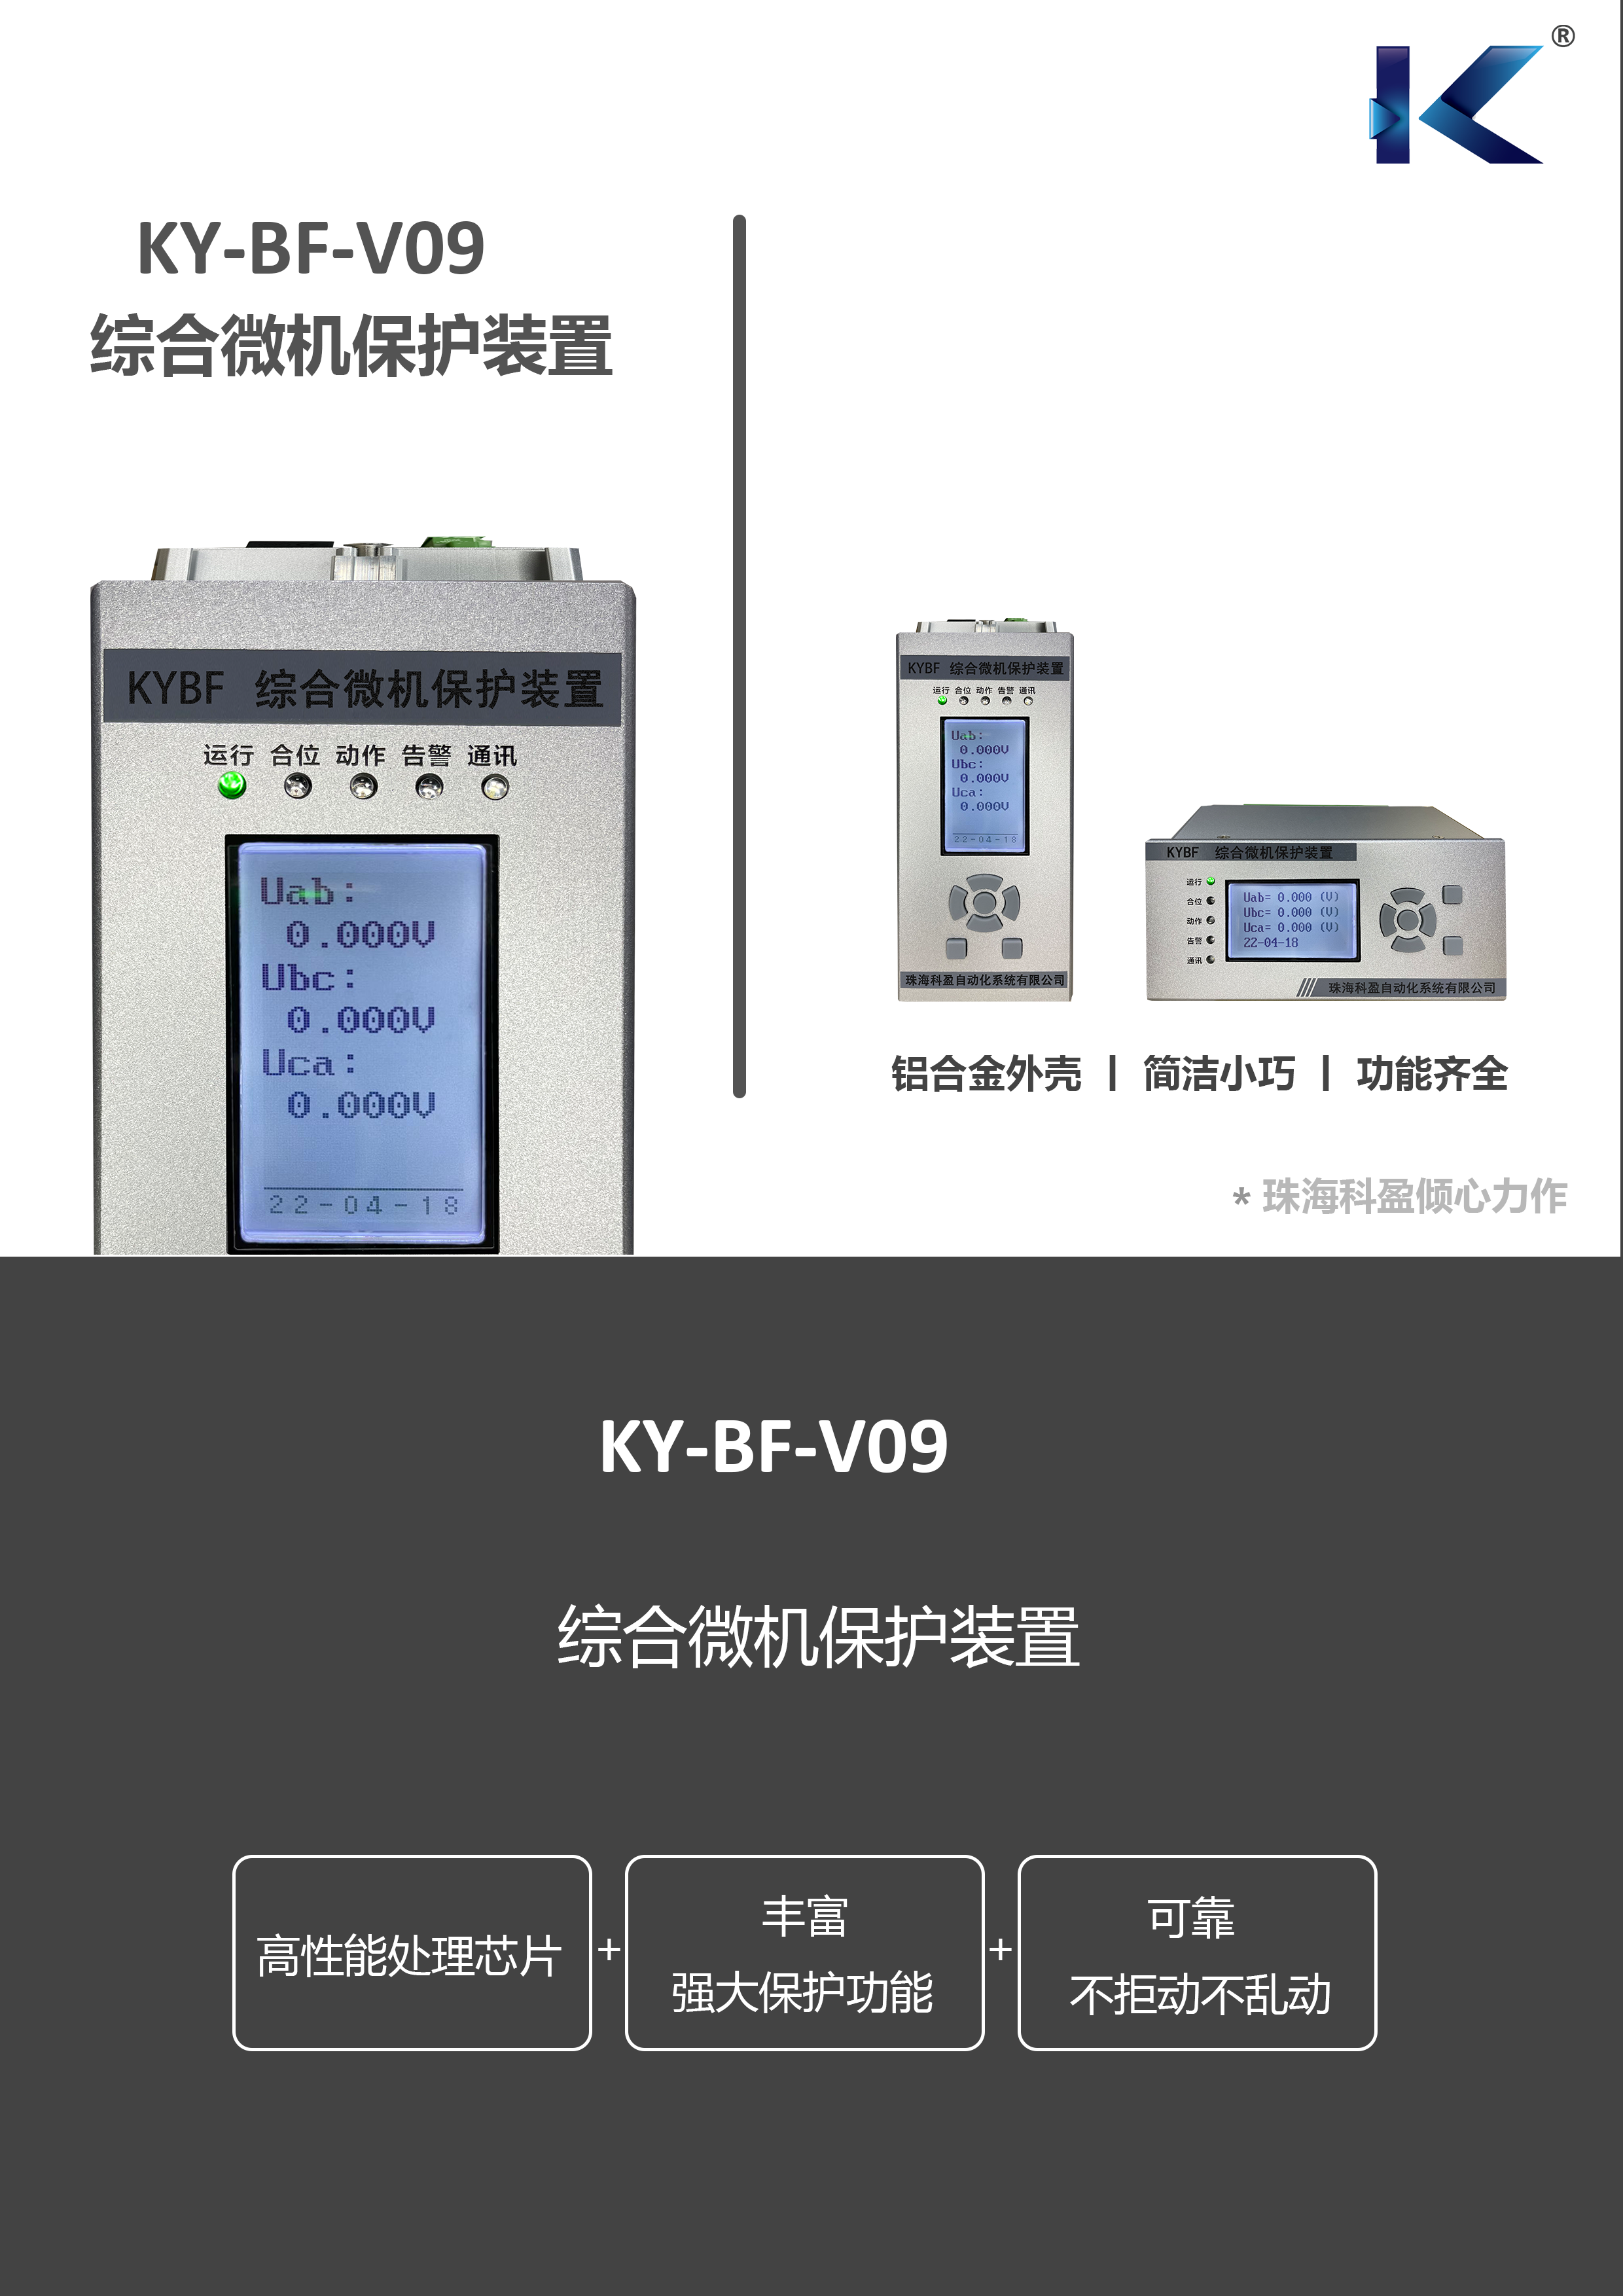 V09 产品简介 1.png